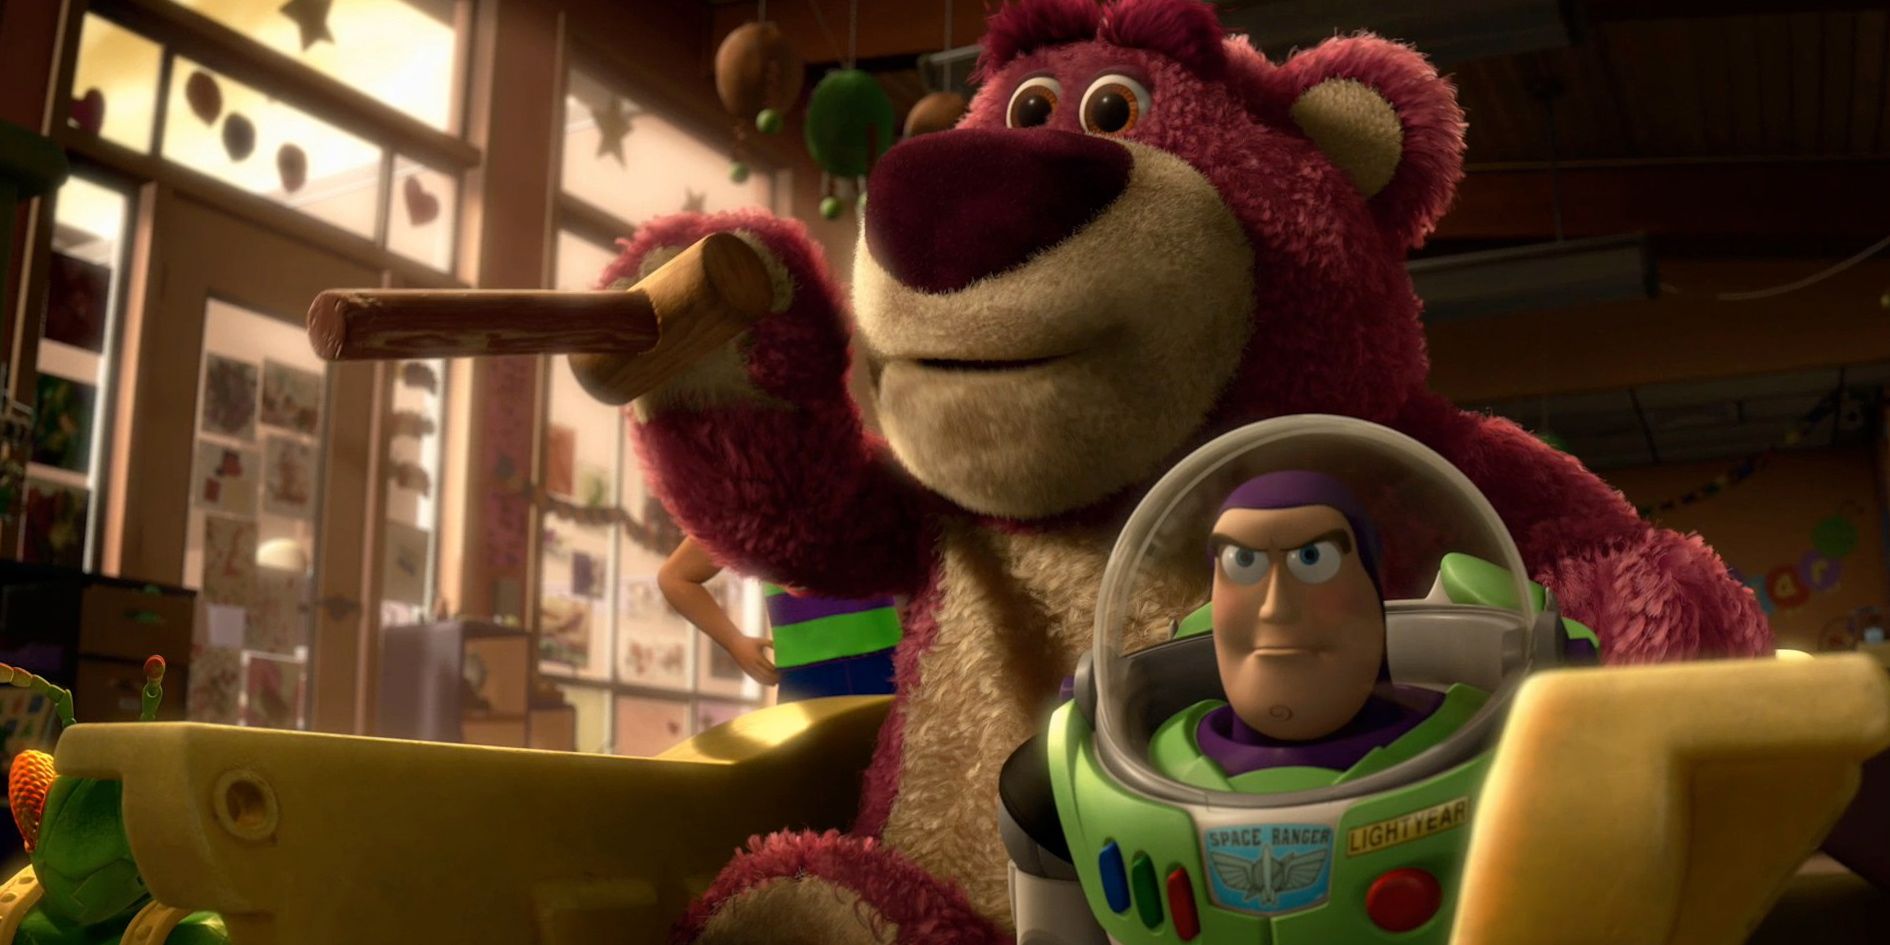 Lotso and Buzz Lightyear in Toy Story 3